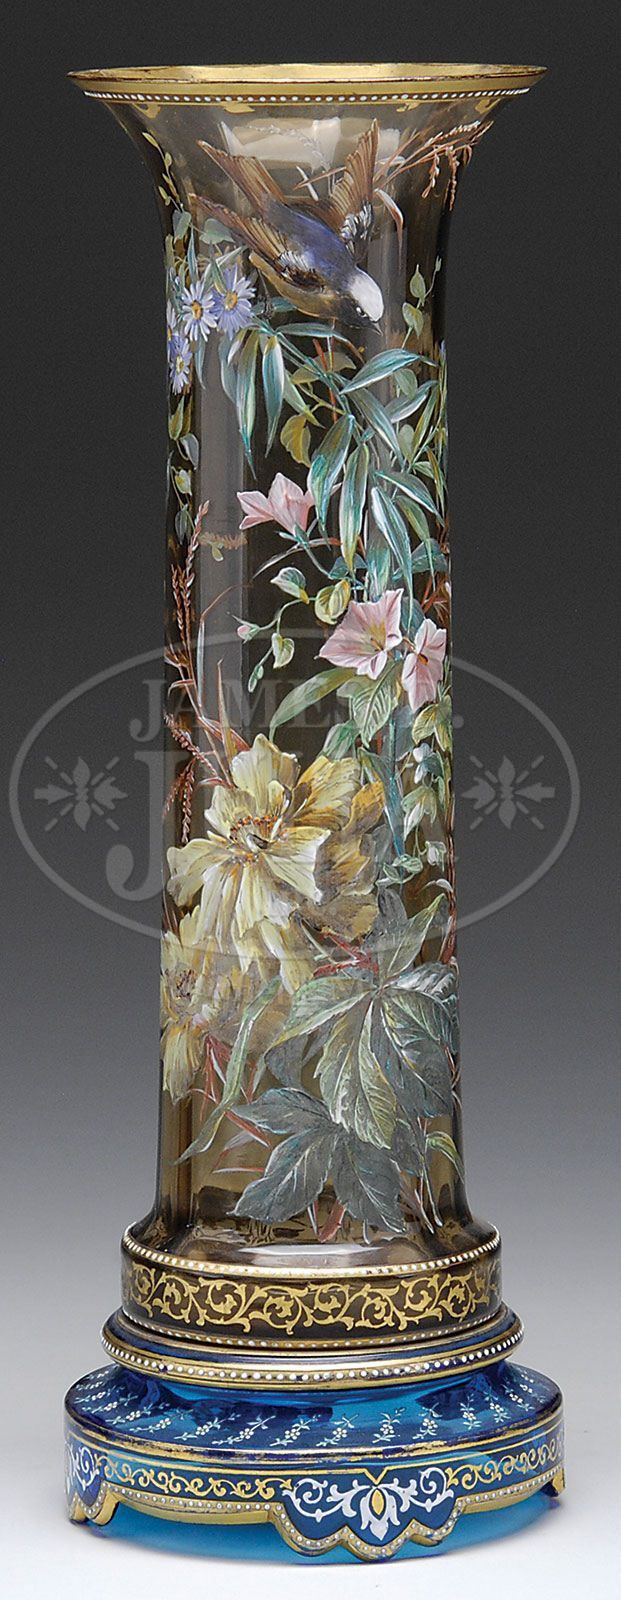 26 Popular Beaker Flower Vase 2024 free download beaker flower vase of 46 best other pretty glassware images on pinterest antique glass intended for the entire vase has an enameled decoration with a blue bird resting amidst the flowers and